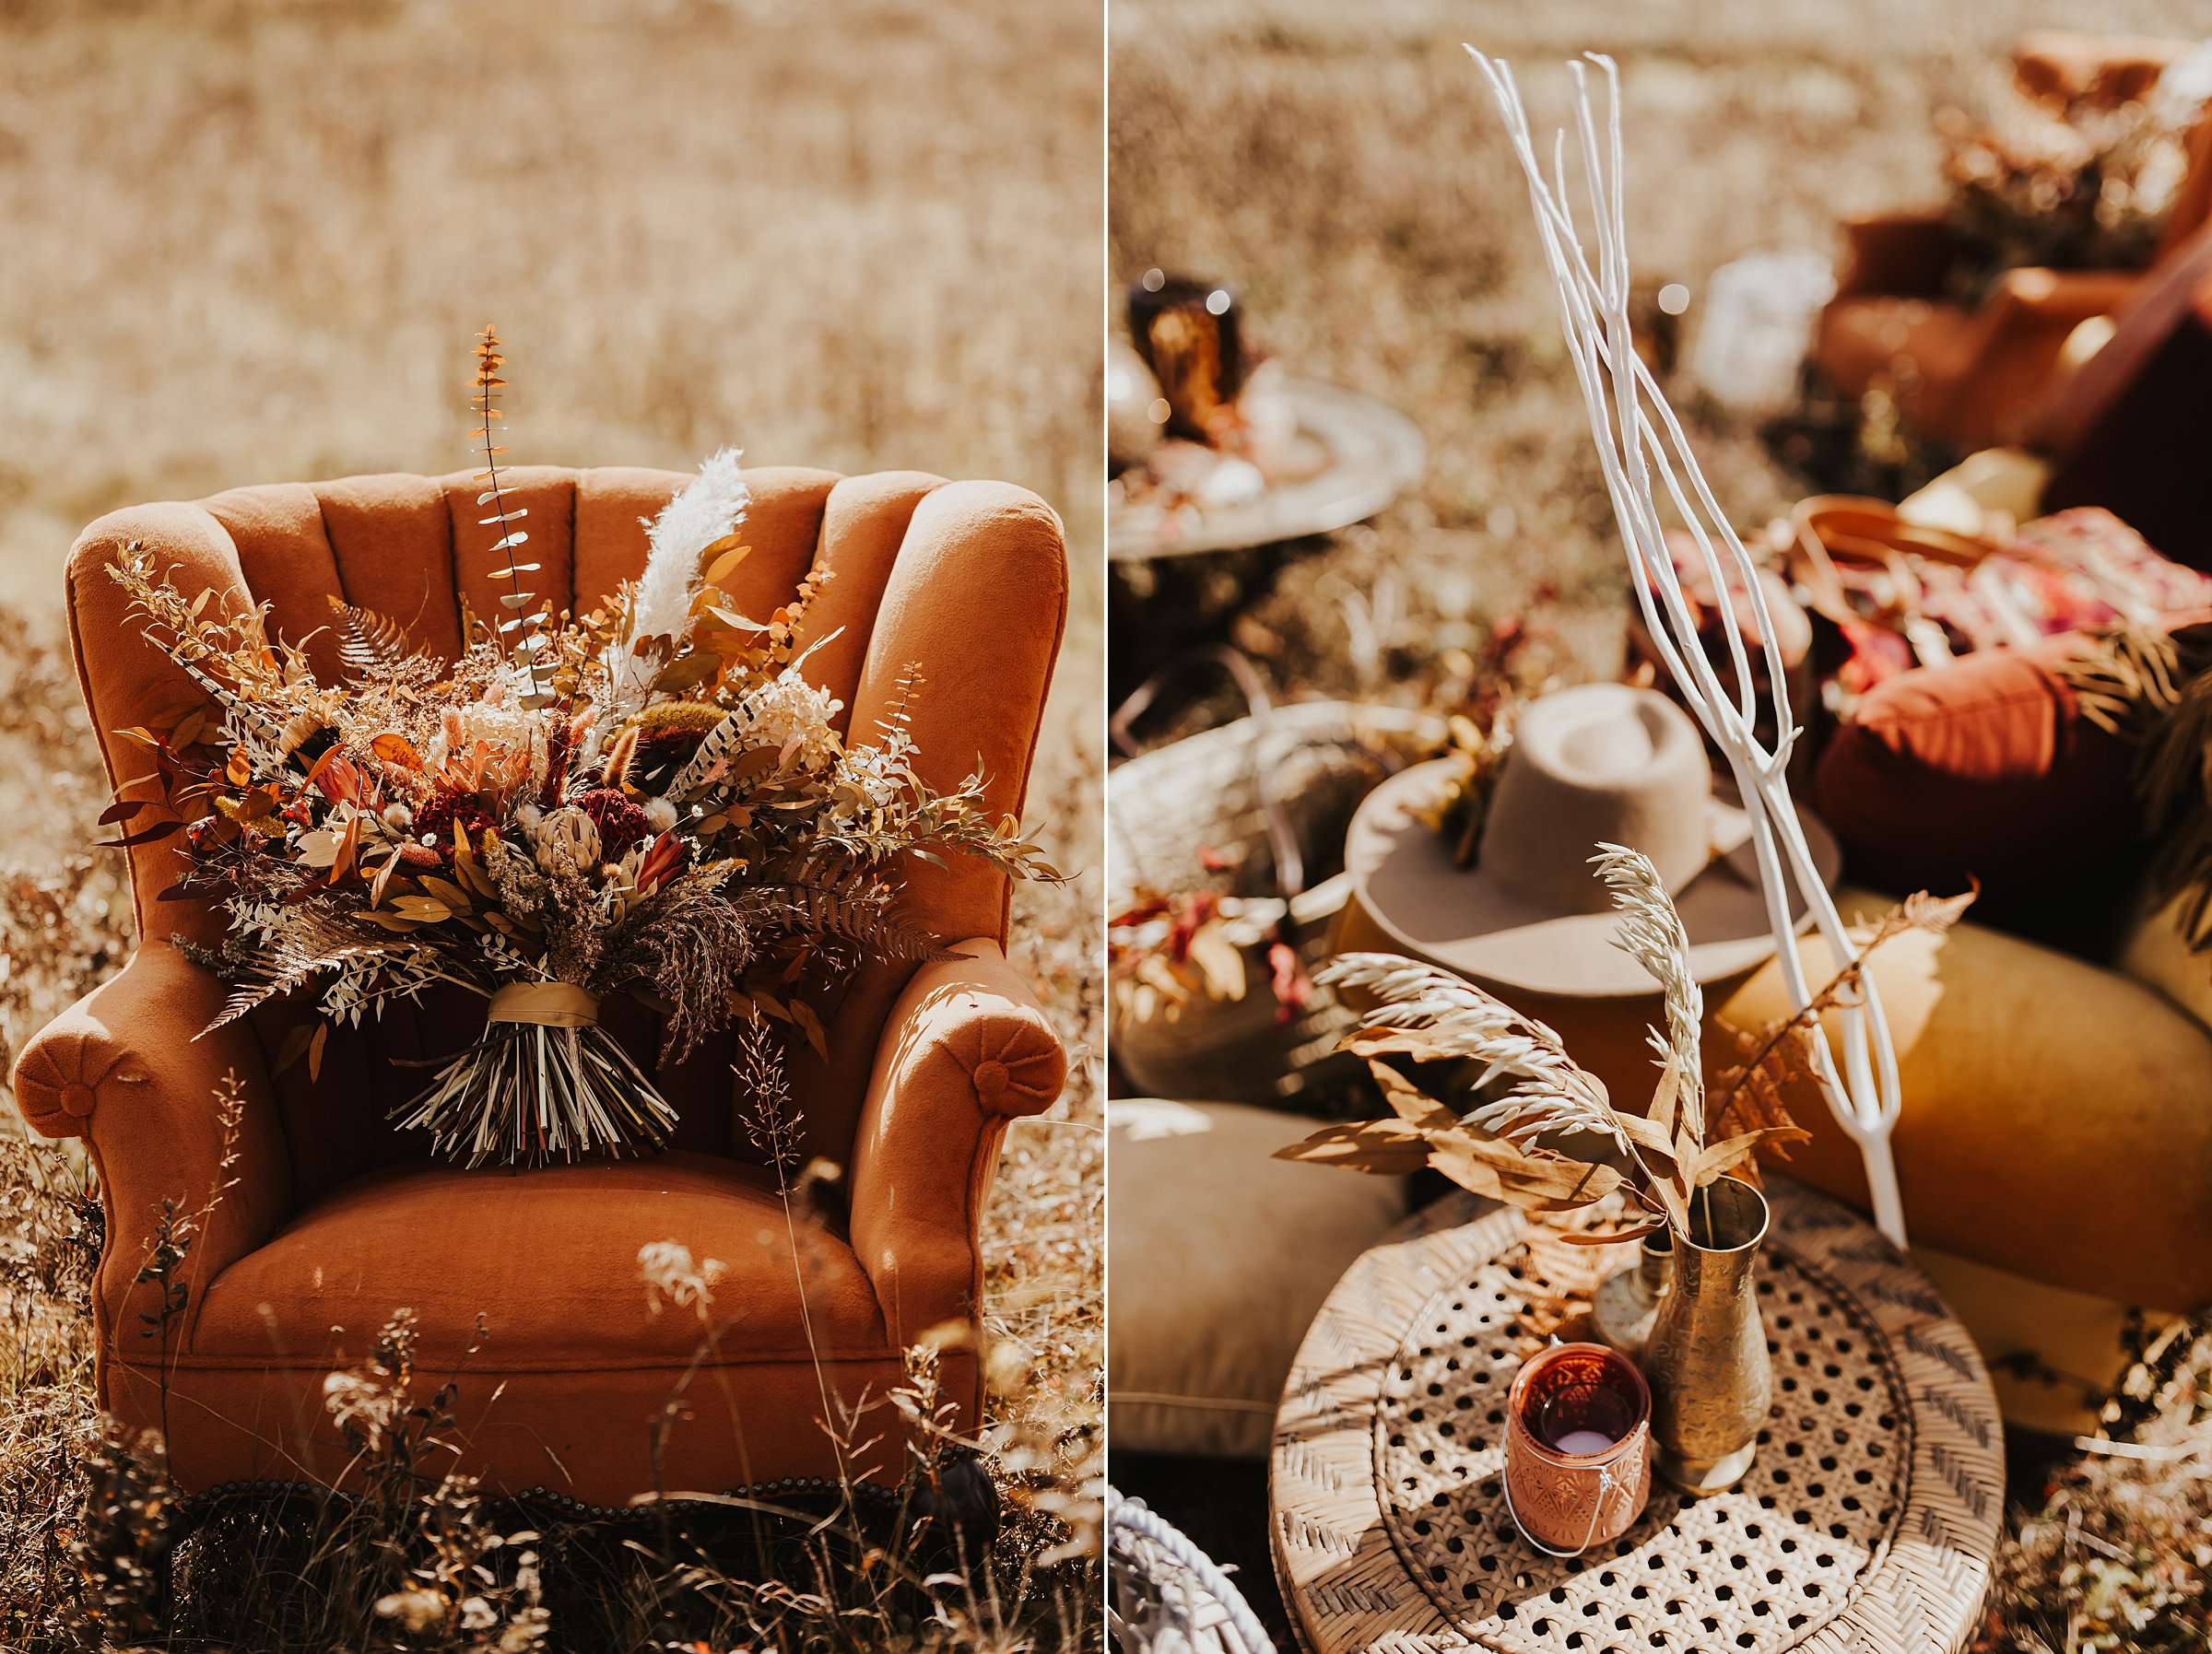 Orange couch with dried flower bouquet